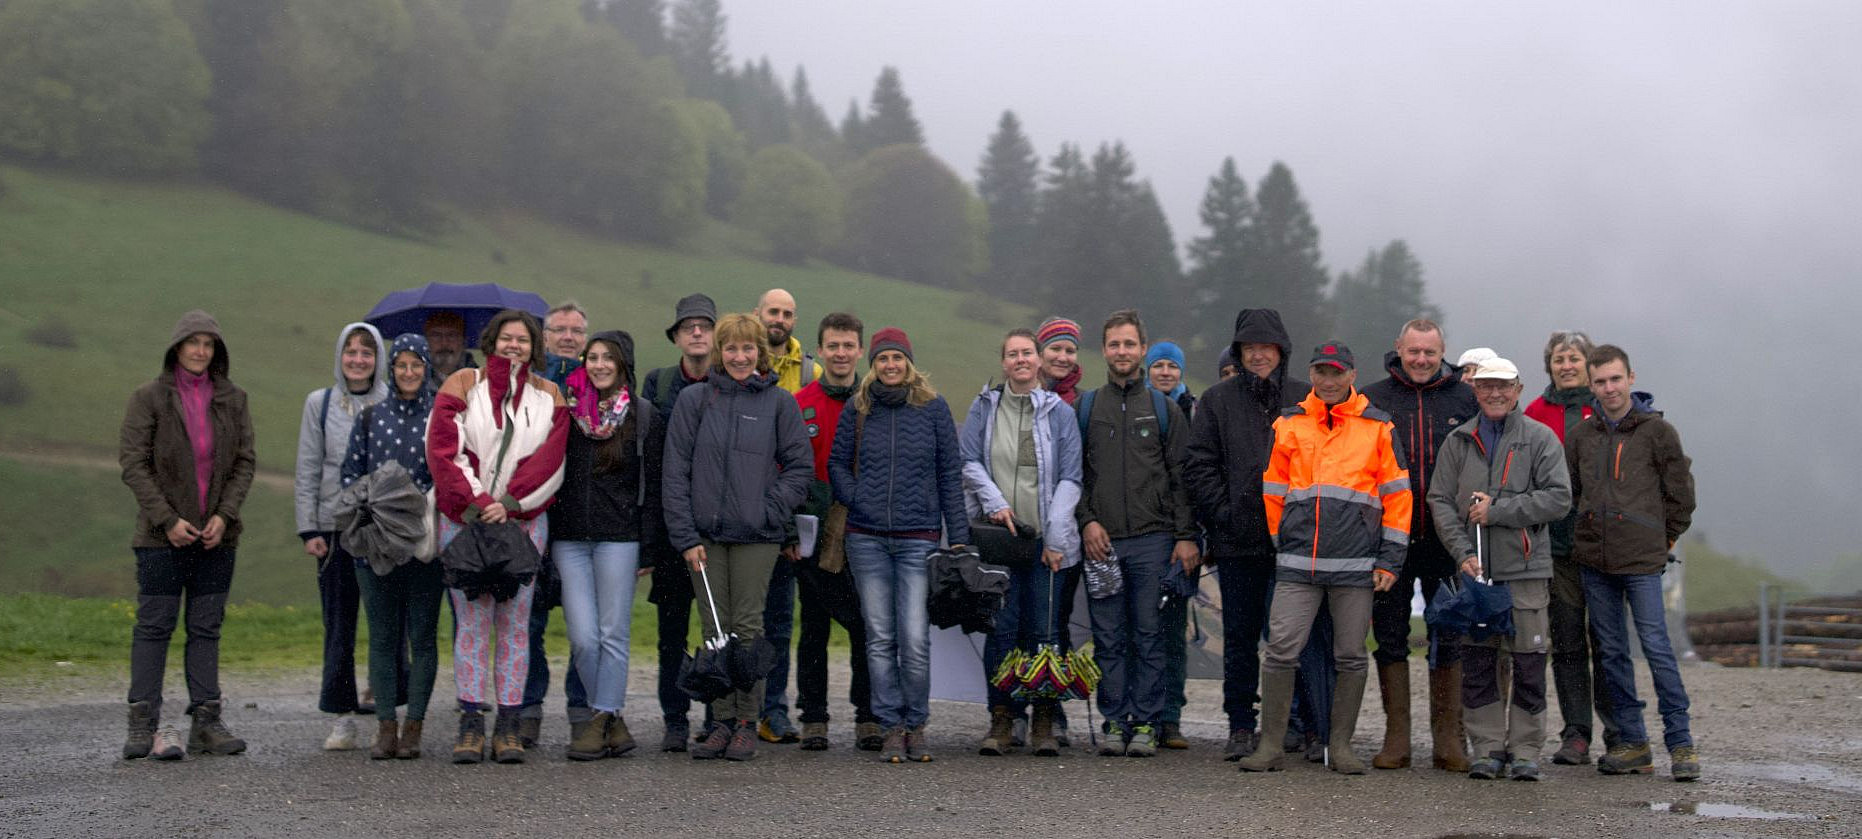 The people in the project consortium on a rainy day in a French forest. ©Forest EcoValue